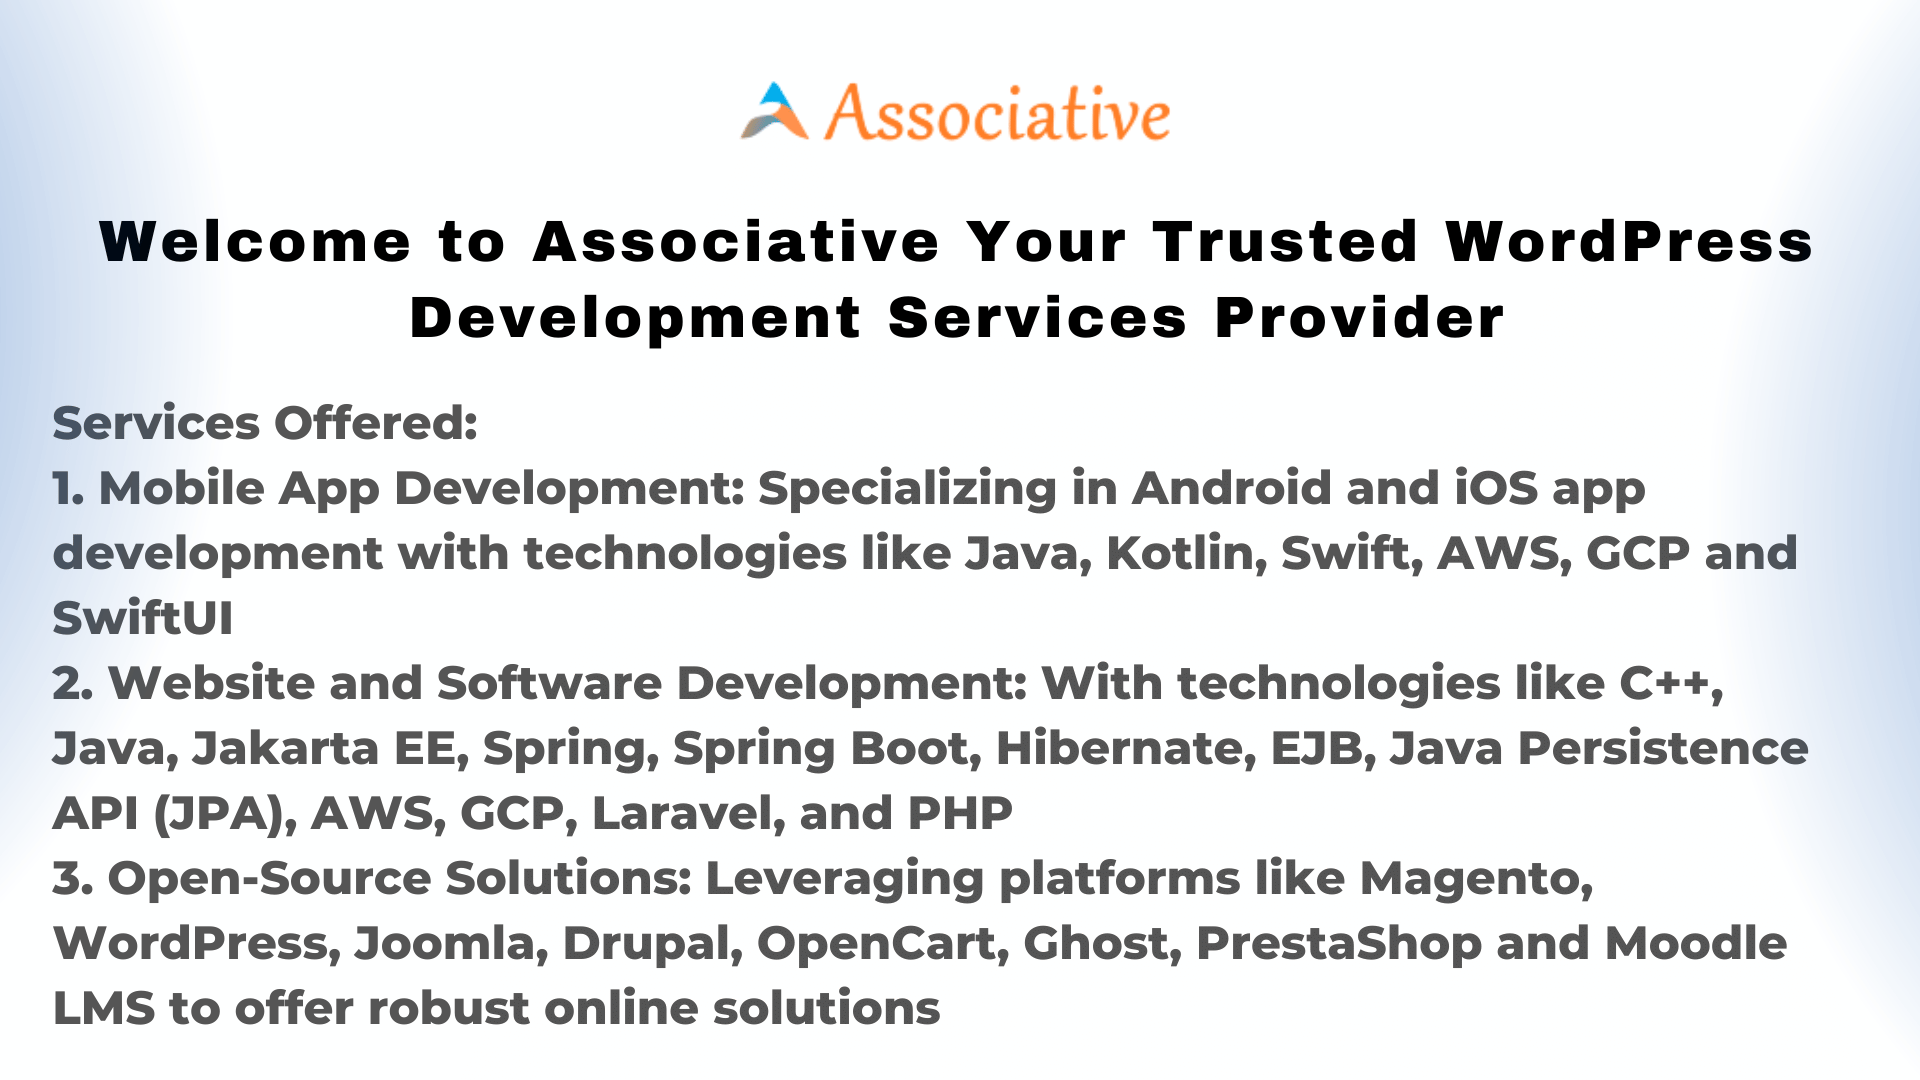 Welcome to Associative Your Trusted WordPress Development Services Provider